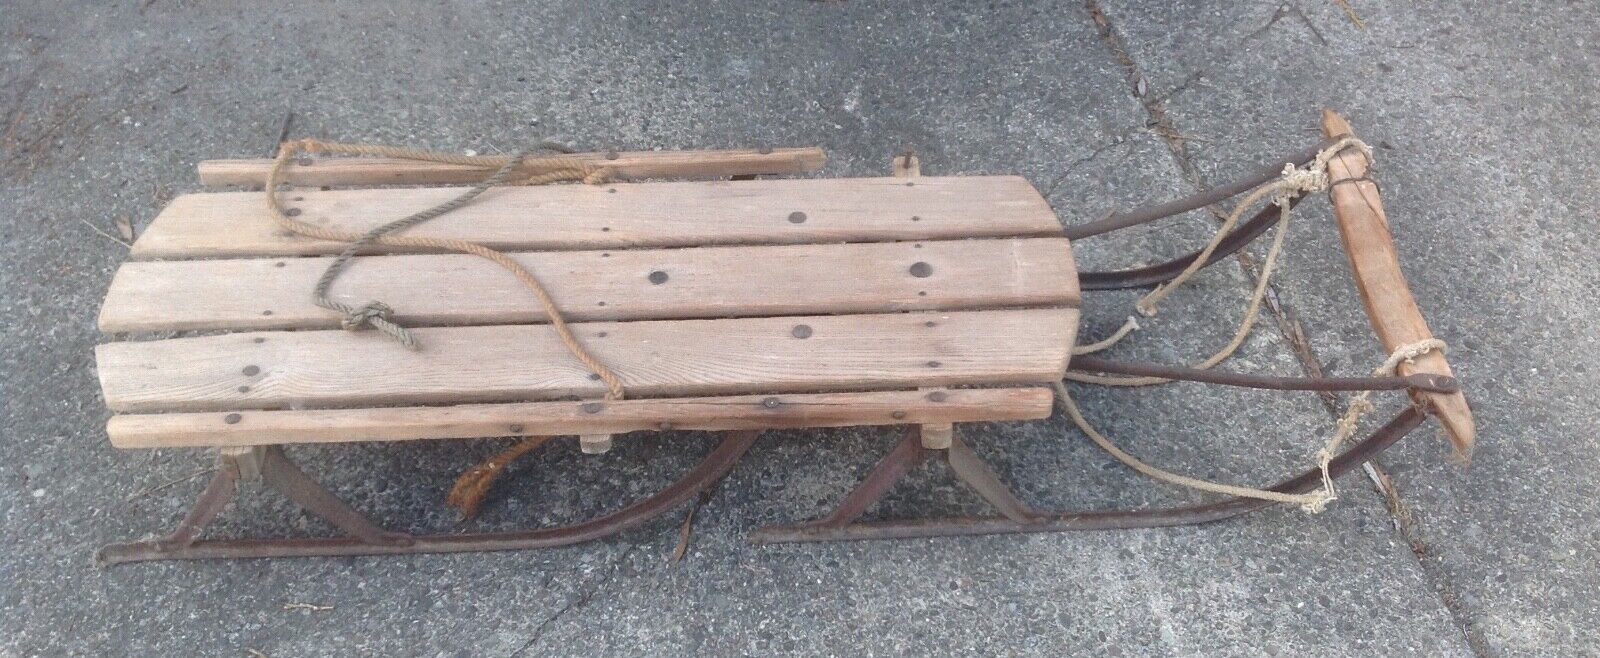 Antique wooden sled, iron runners & rope handles, 47"x14", c.1890-1900, WNY p/u